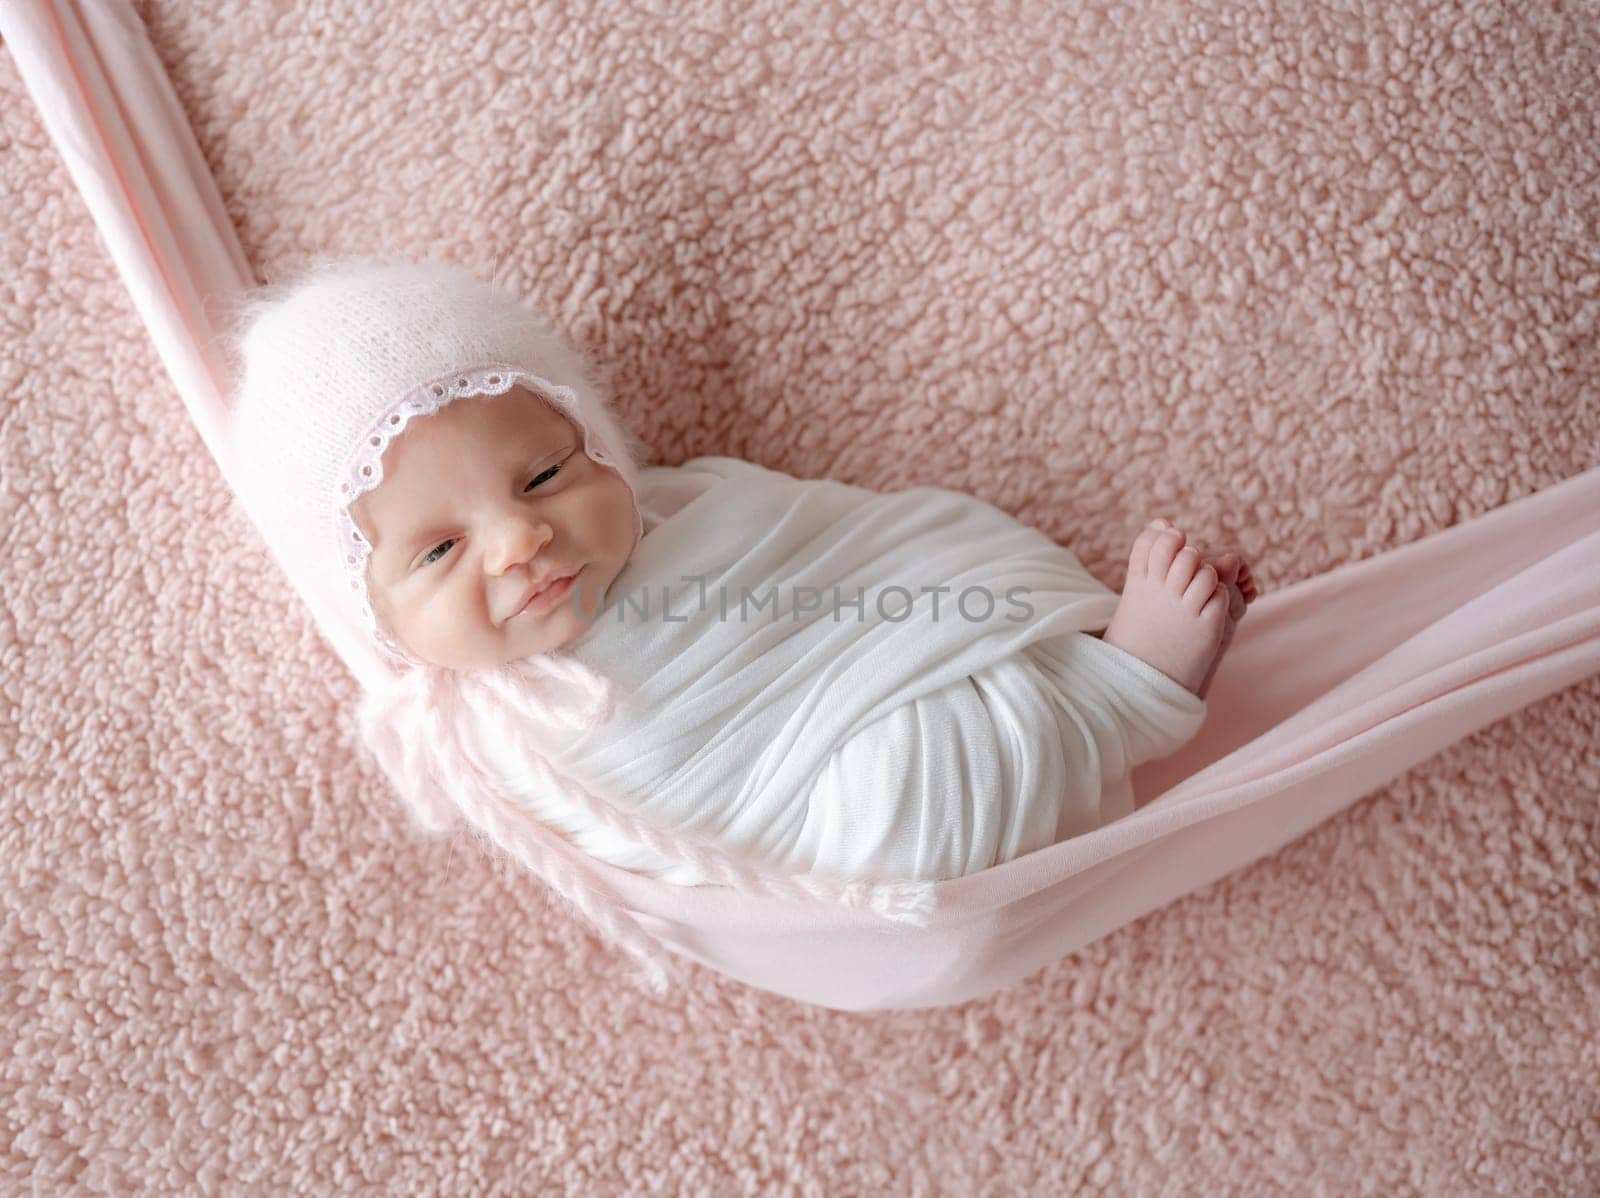 Newborn Baby Wrapped In Swaddle Sleeps In Hammock During Photoshoot With Smile by tan4ikk1